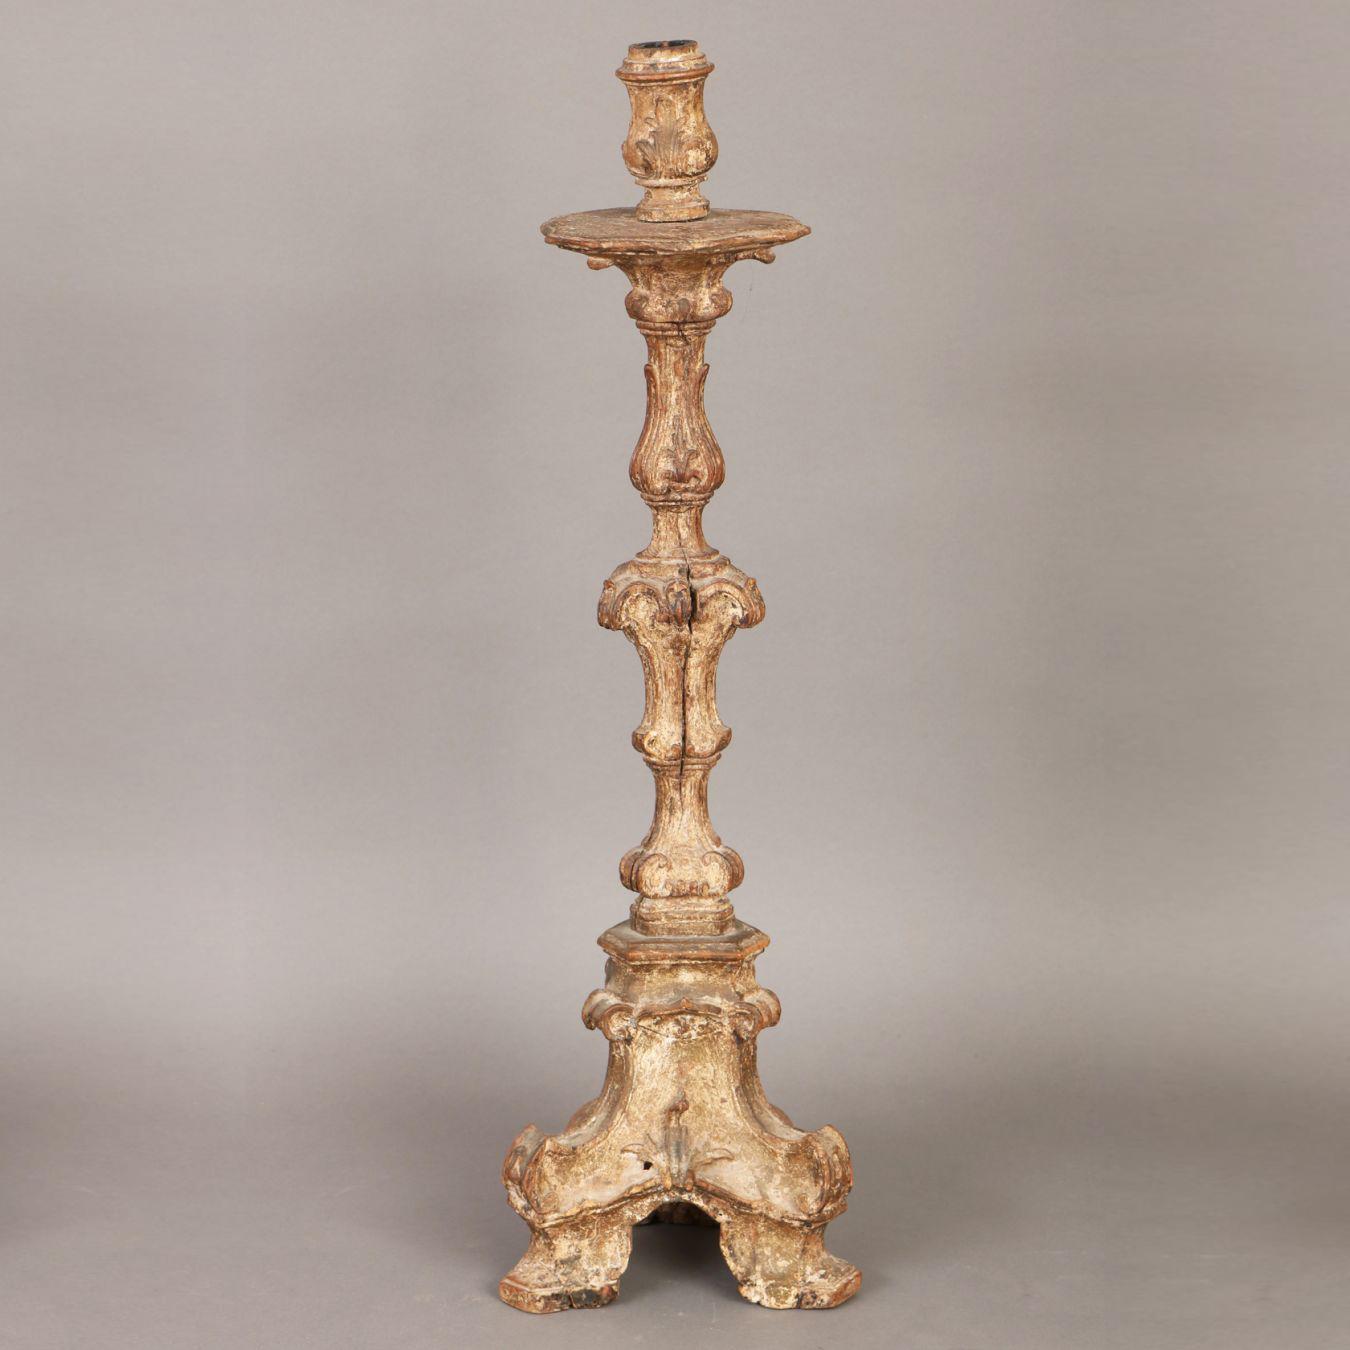 Elegant 18th century Baroque church candlestick with 3-edged baluster shape and vase spout.

Measures: H 69cm.

Good antique condition considering the age.